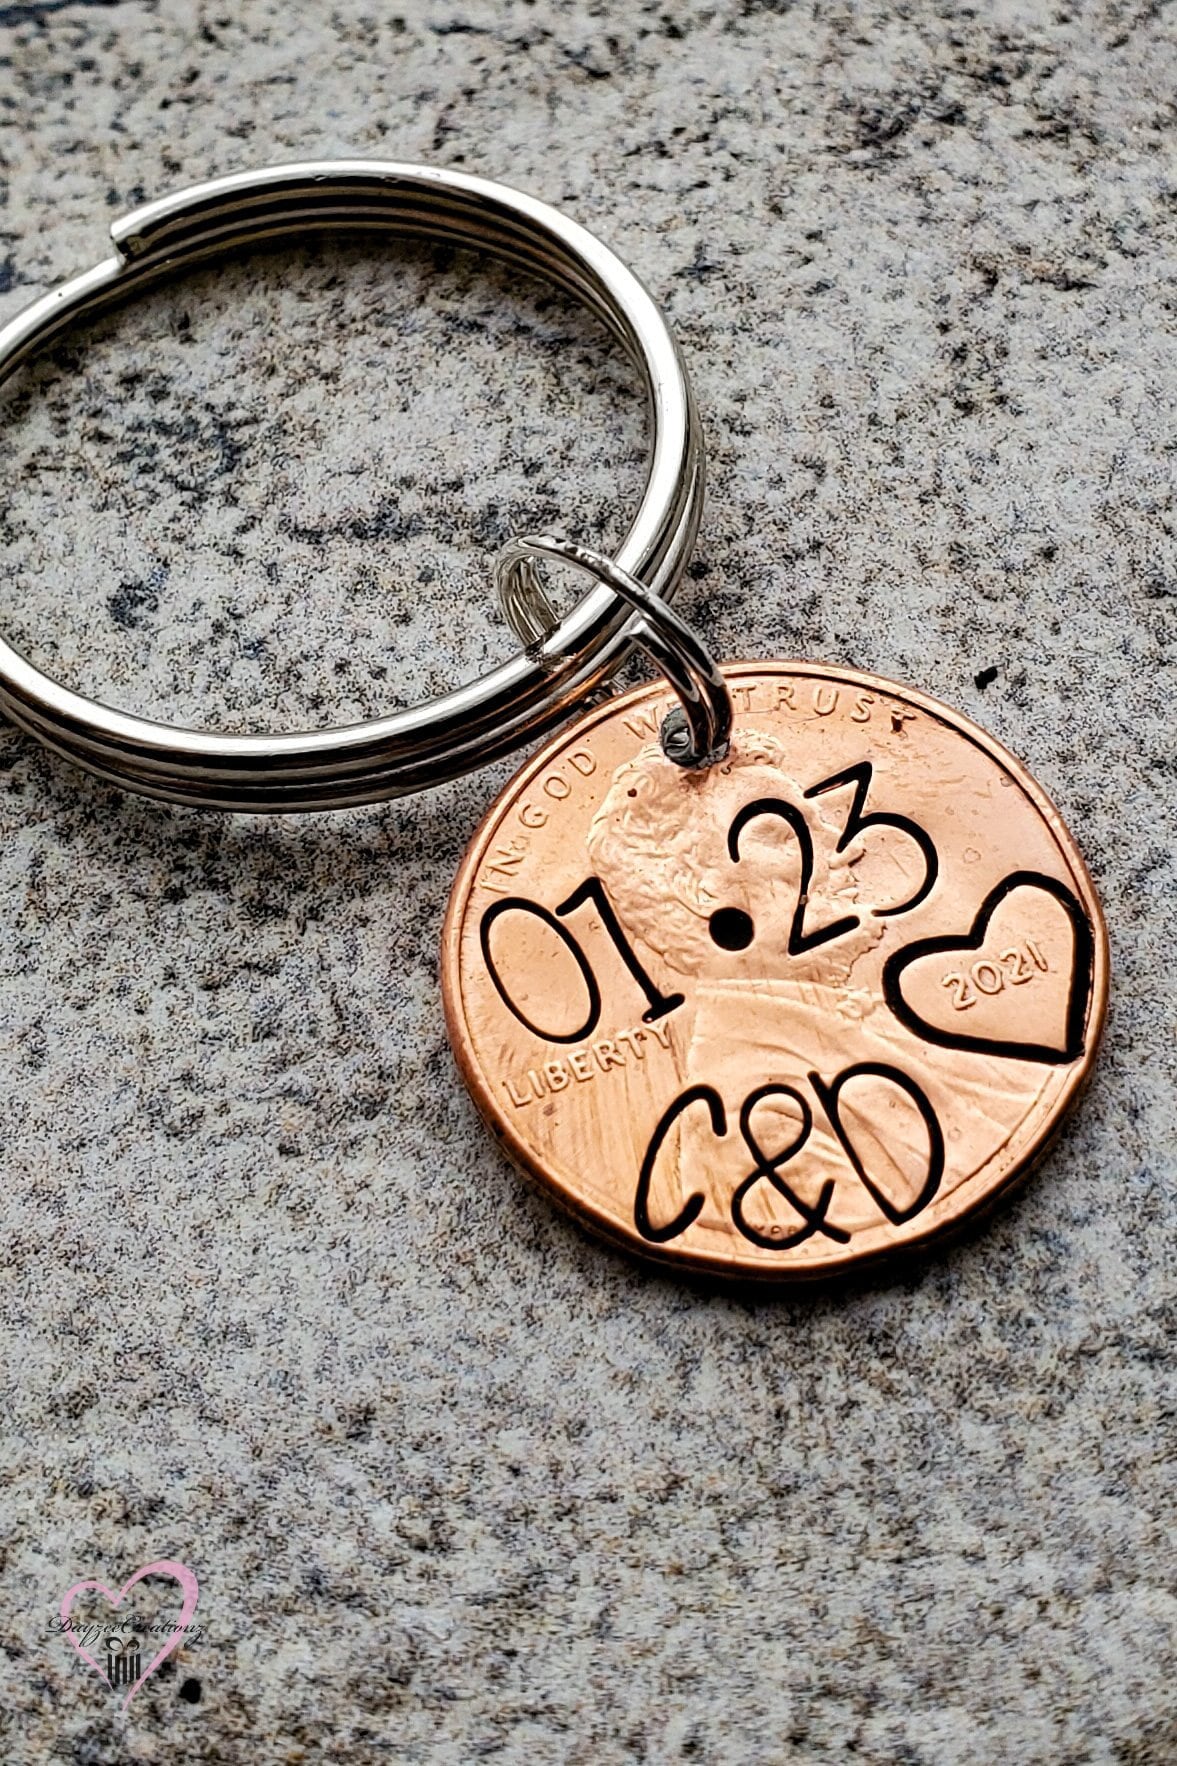 Personalized Valentine's Day Gift for Him, Penny Keychain, Anniversary Gift For Men, Girlfriend, Boyfriend, Husband, Wife, Wedding, Her, 1st